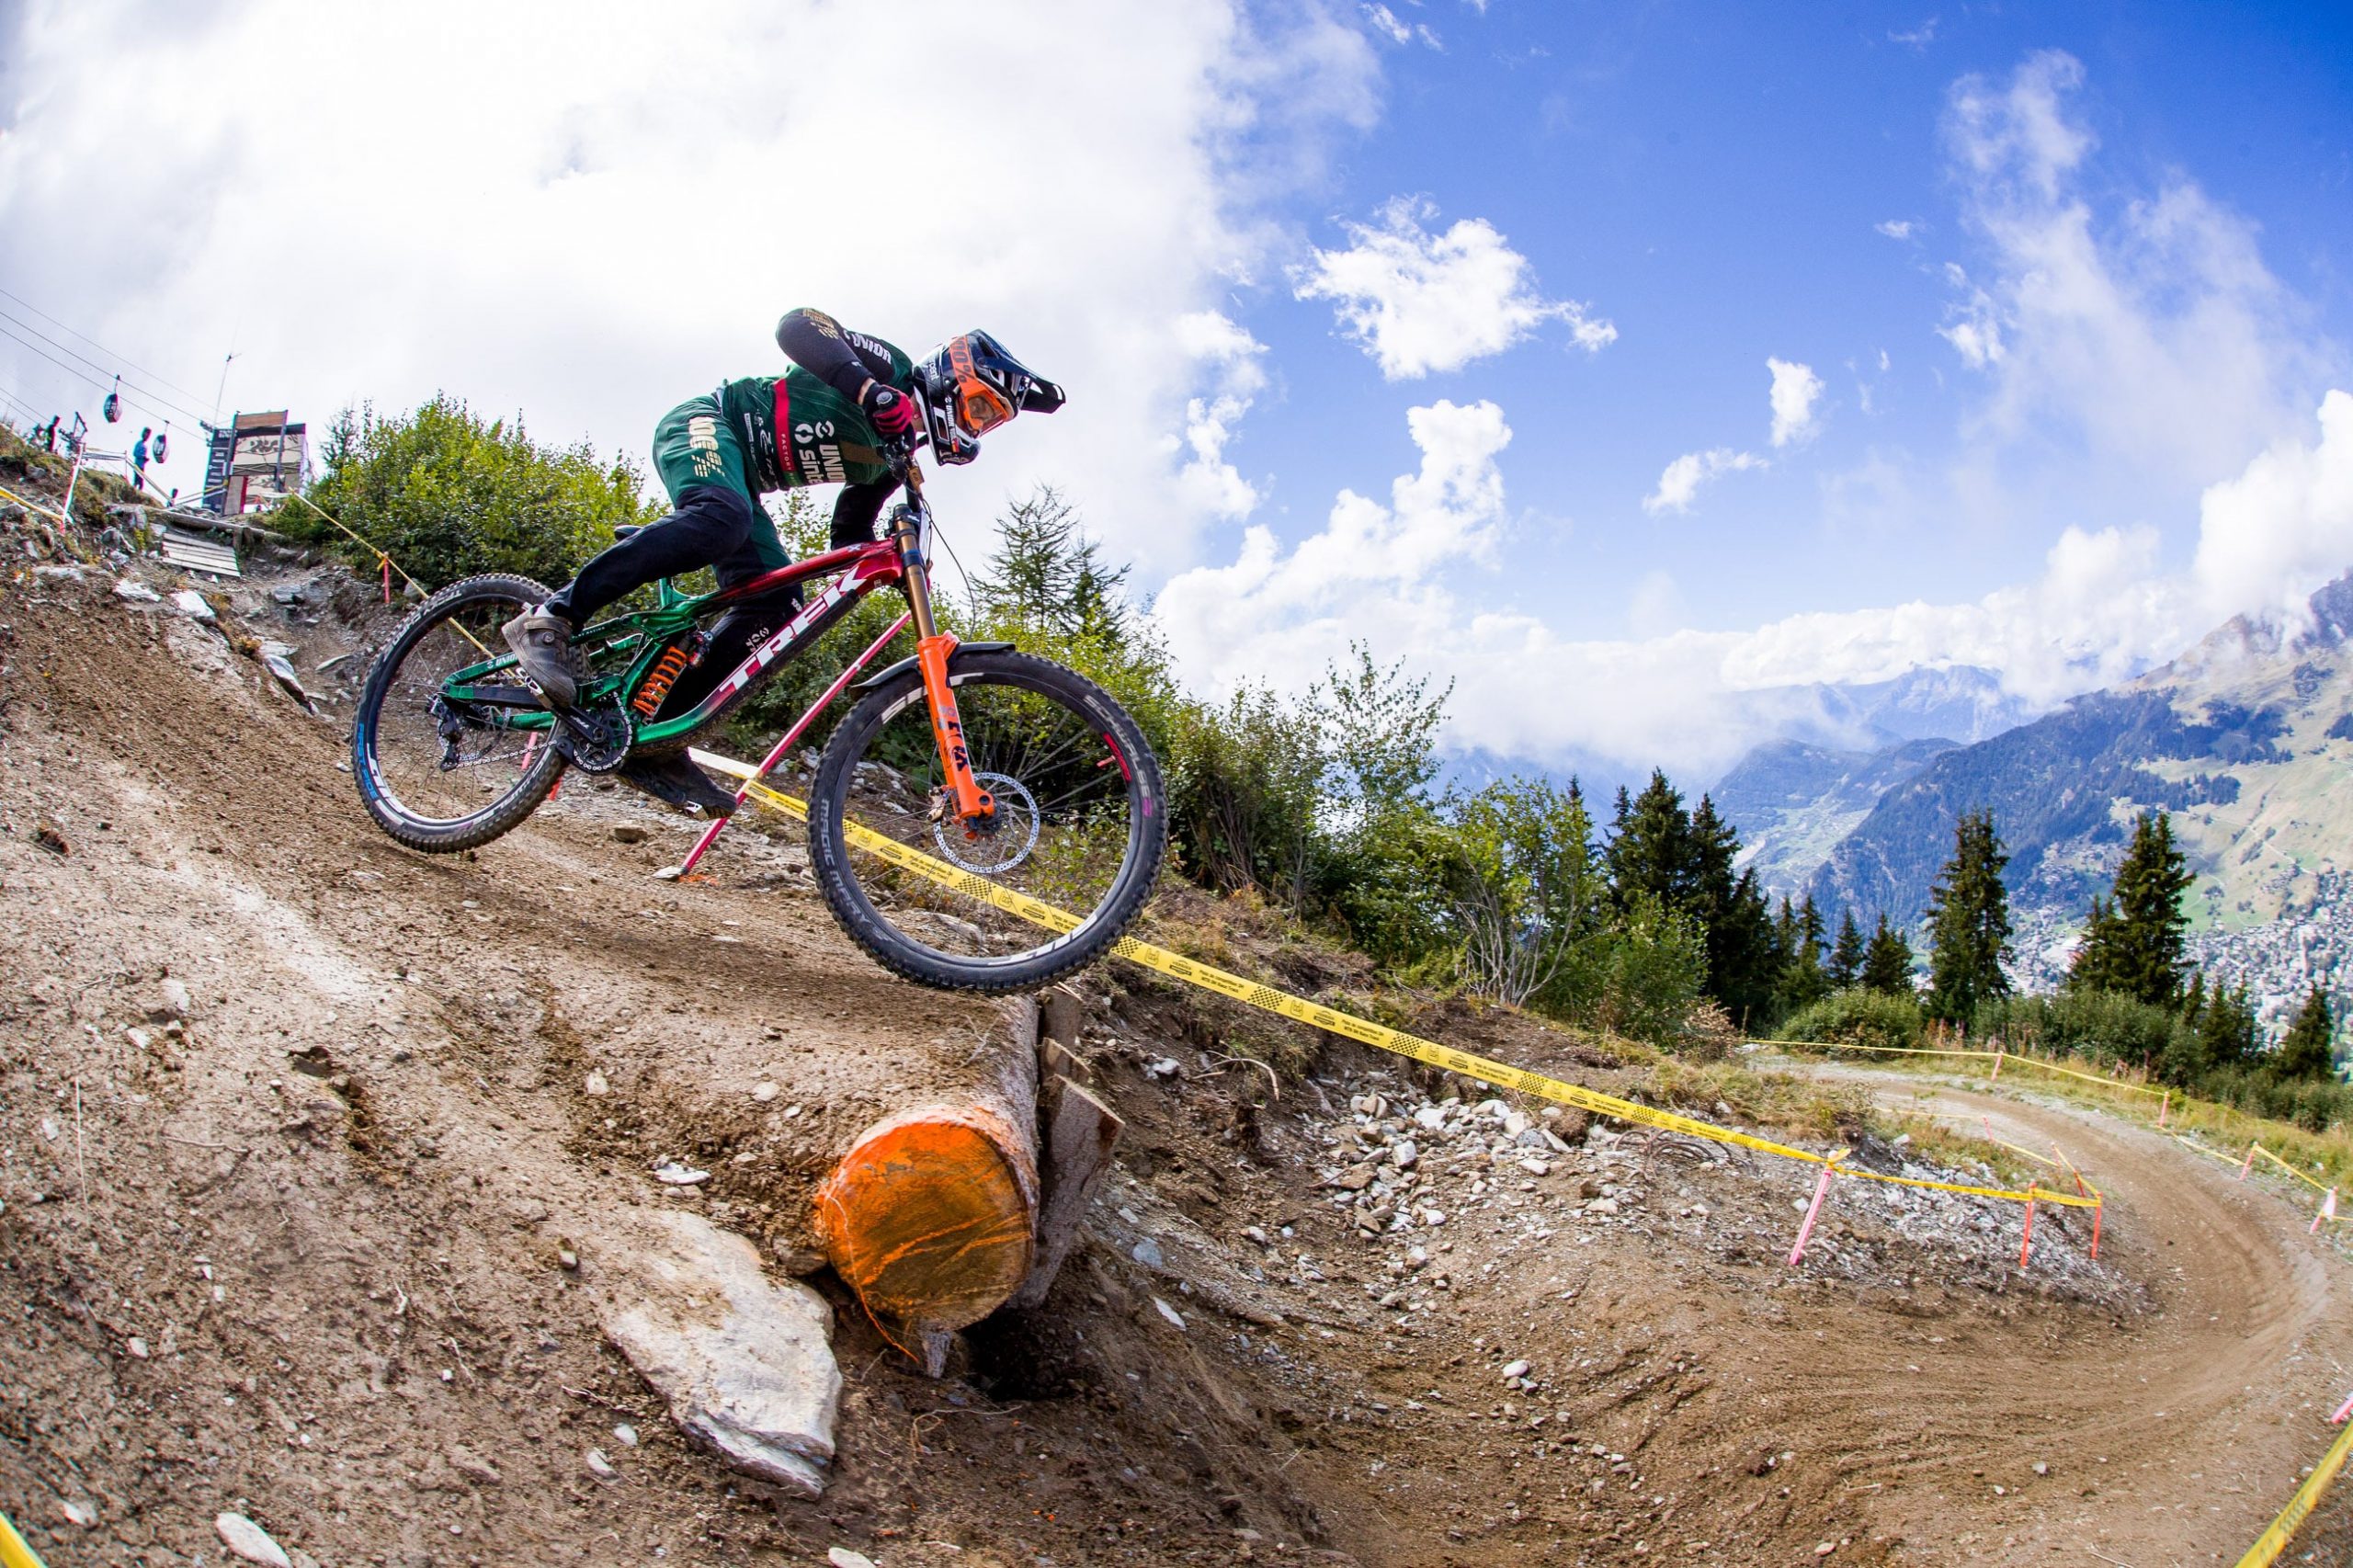 Stan takes 5th overall in the iXS European Downhill Cup